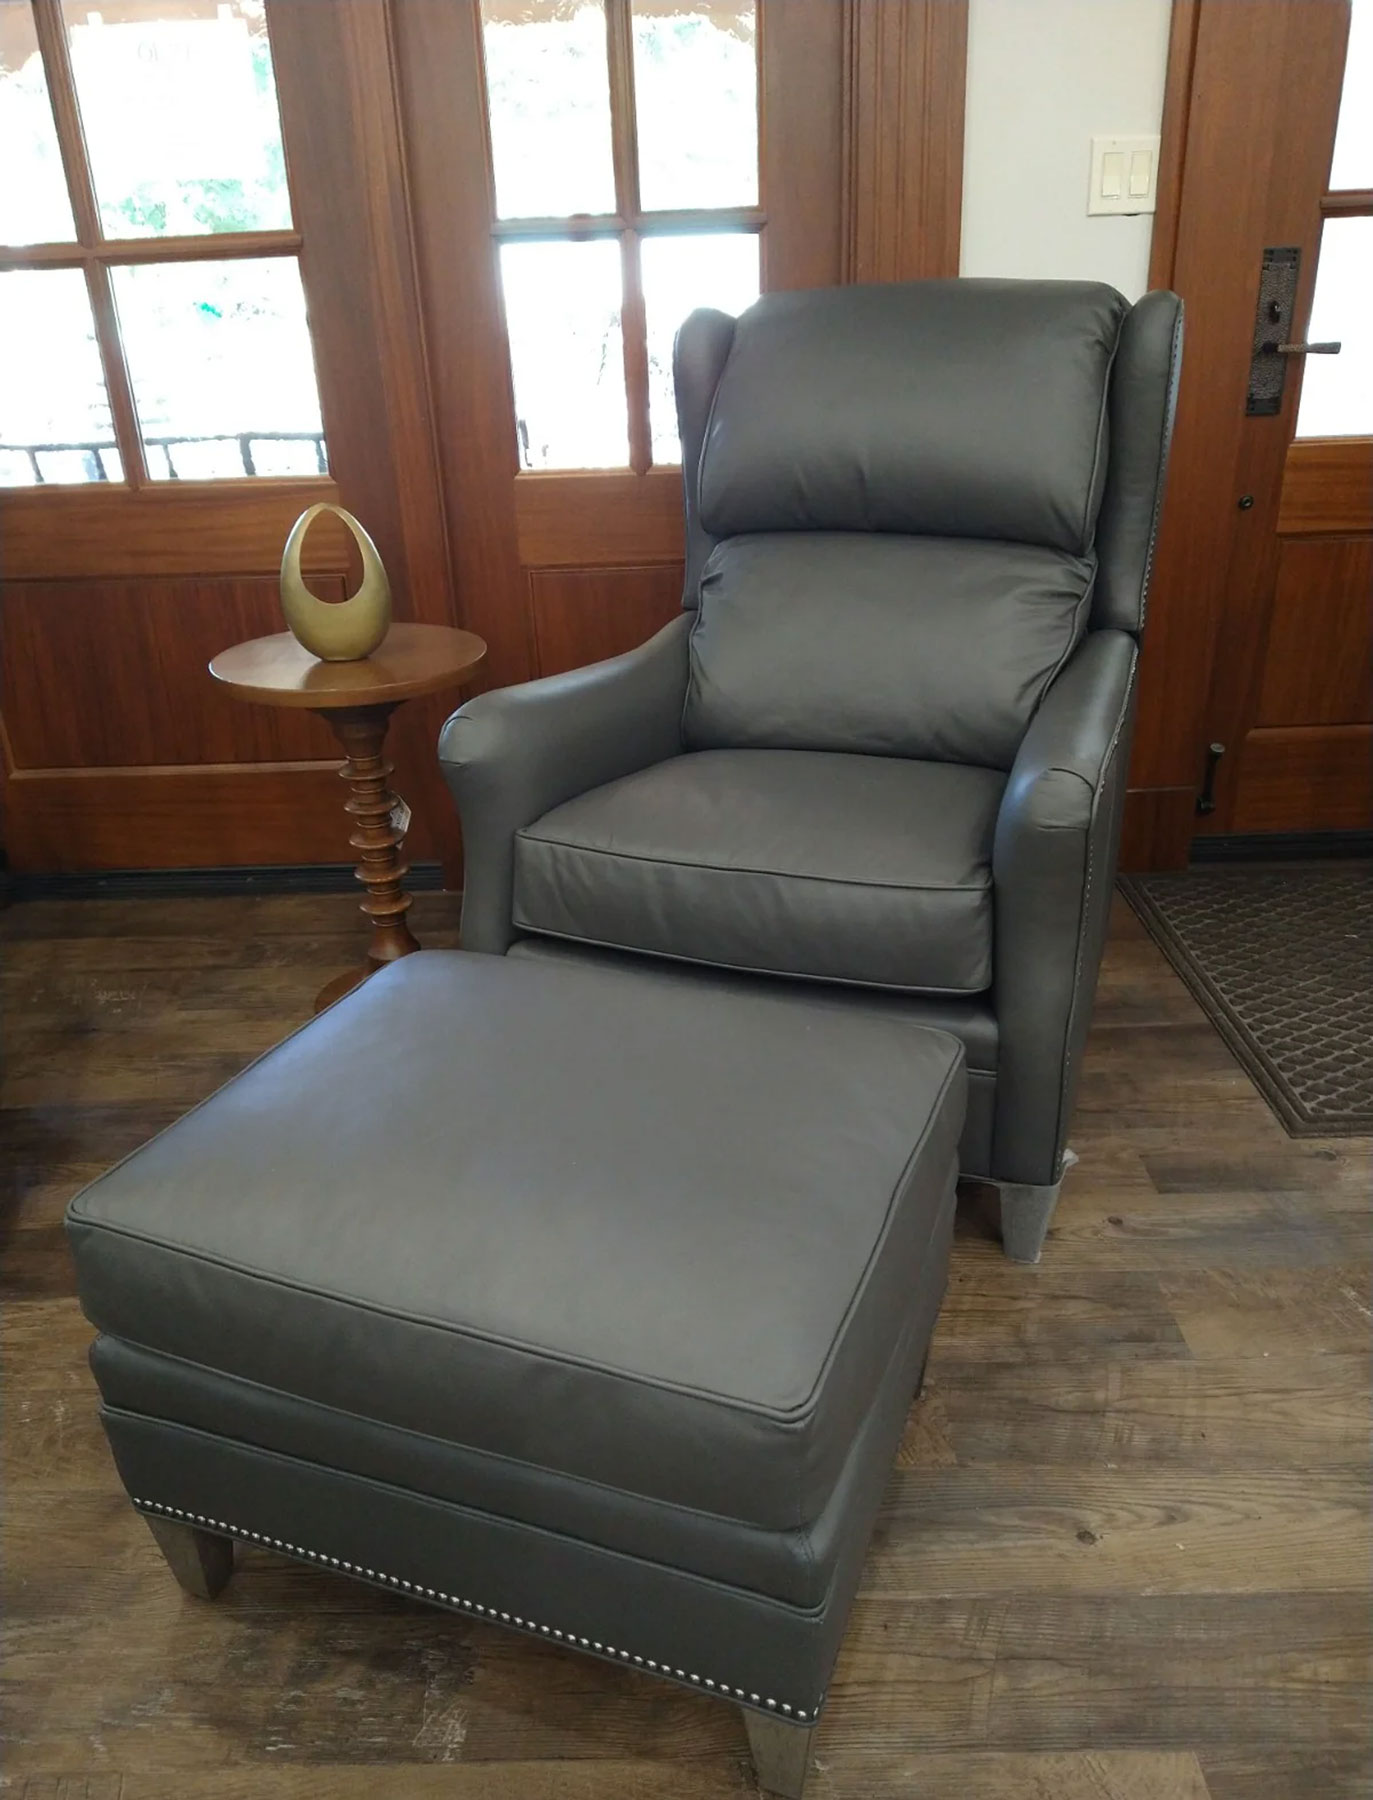 Wesley Hall L540 Stevenson Tilt Back Chair and Ottoman in Tribeca Quarry Leather